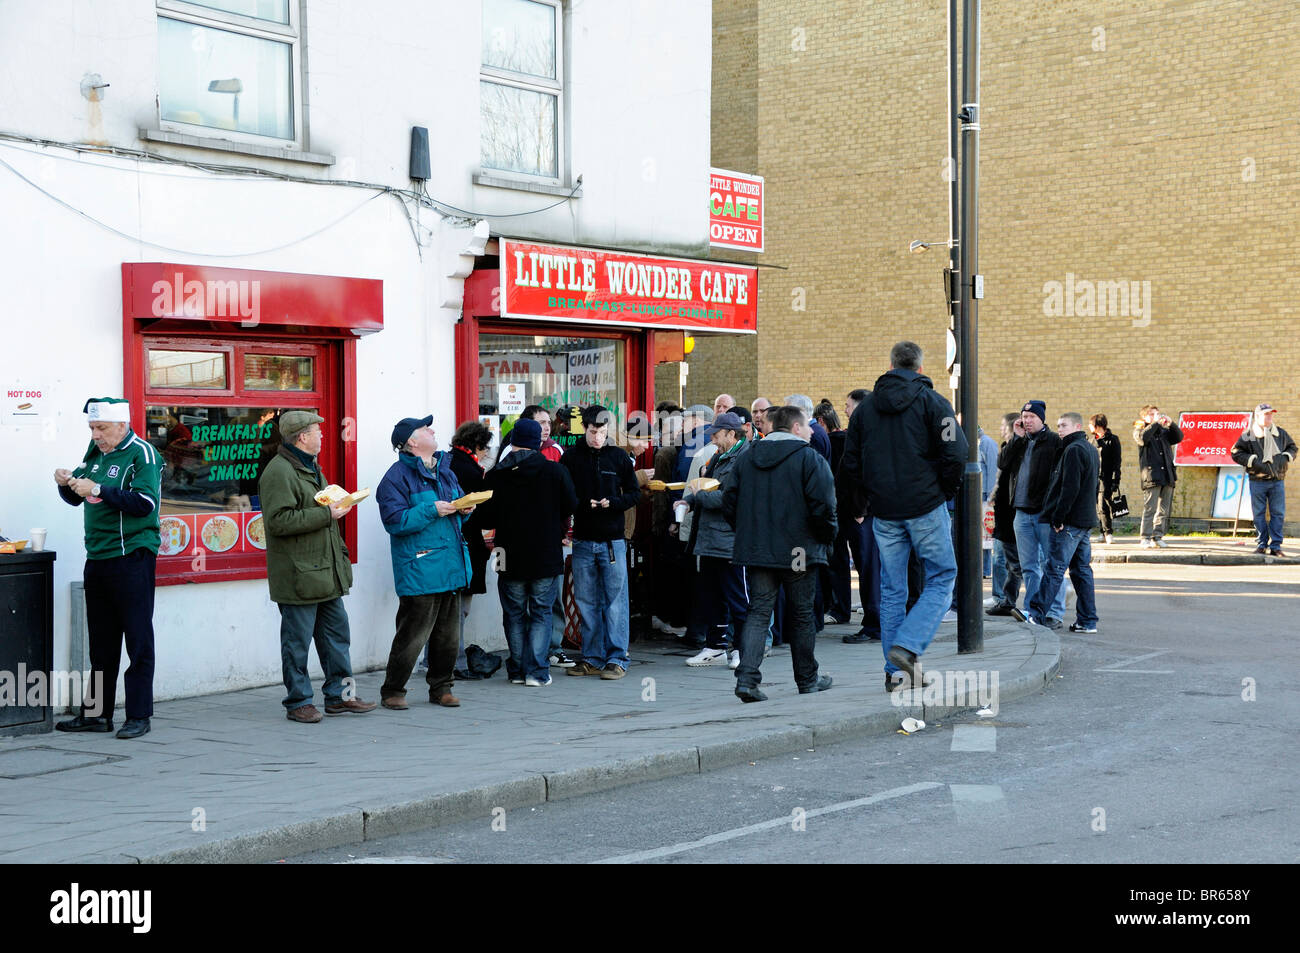 Football fans eating outside the Little Wonder Café on Arsenal Football Club match day Holloway London UK Stock Photo